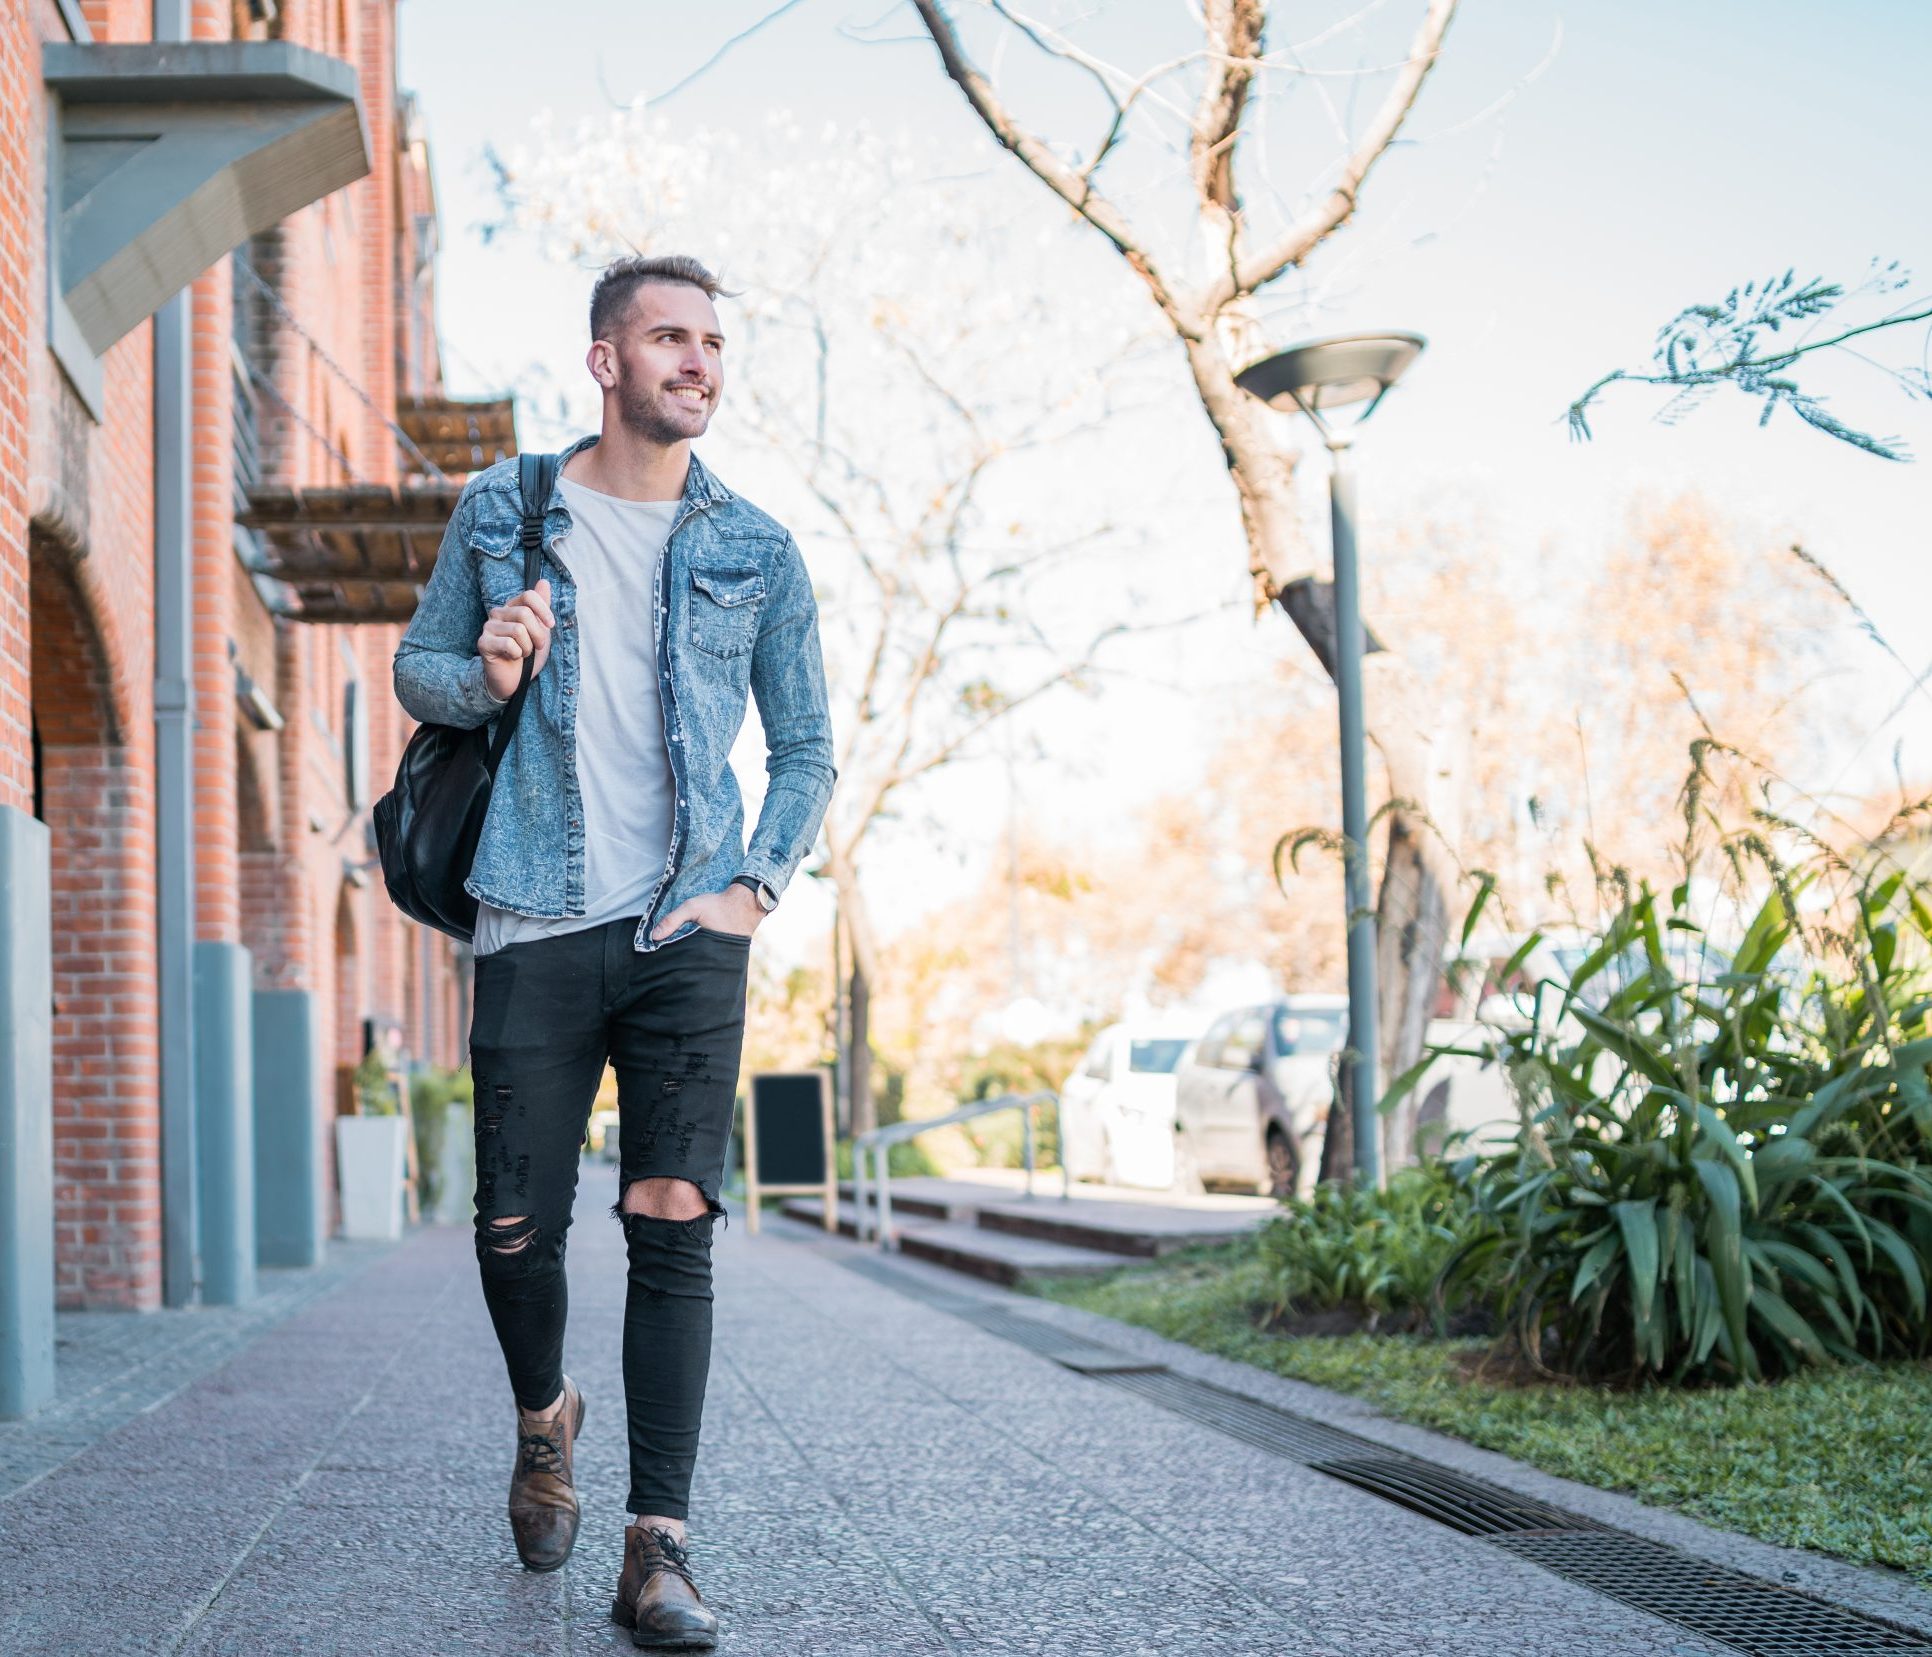 Portrait,Of,Attractive,Young,Man,Walking,On,The,Street,With